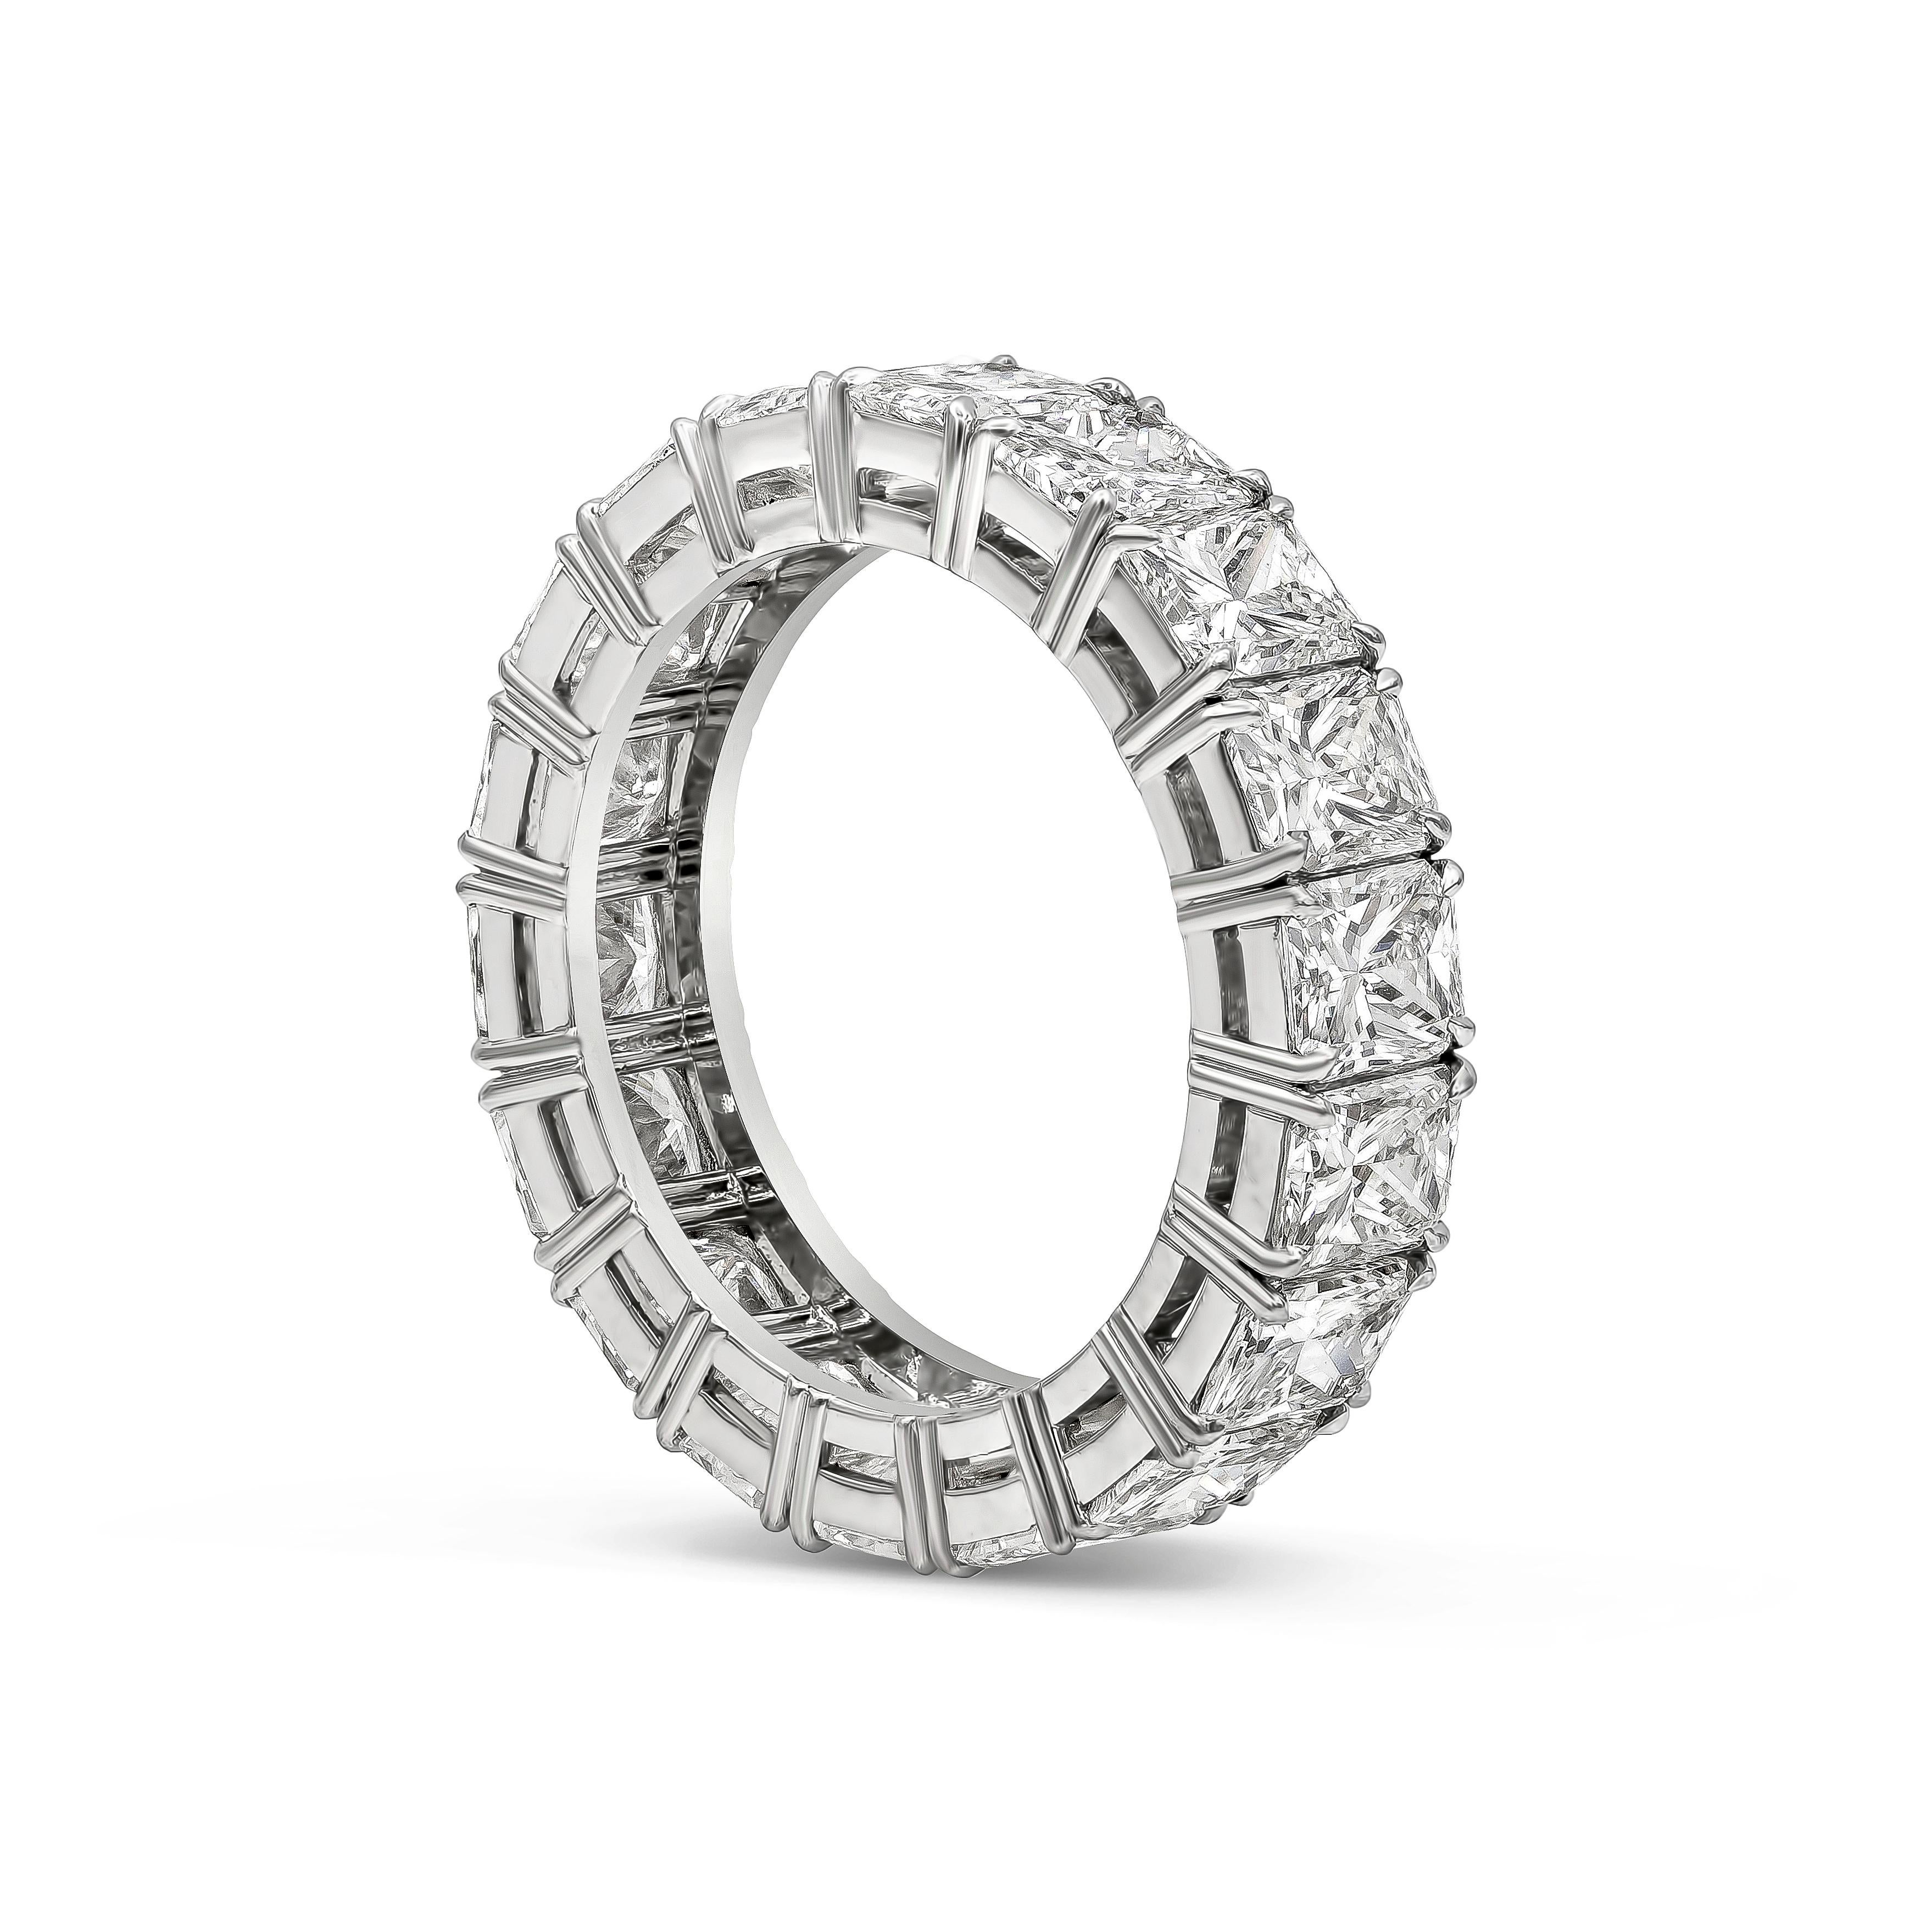 A classic eternity wedding band style showcasing a row of radiant cut diamonds weighing 6.24 carats total, set in a polished platinum mounting. Size 5.75 US. F color VS-VVS clarity.

Style available in different price ranges. Prices are based on